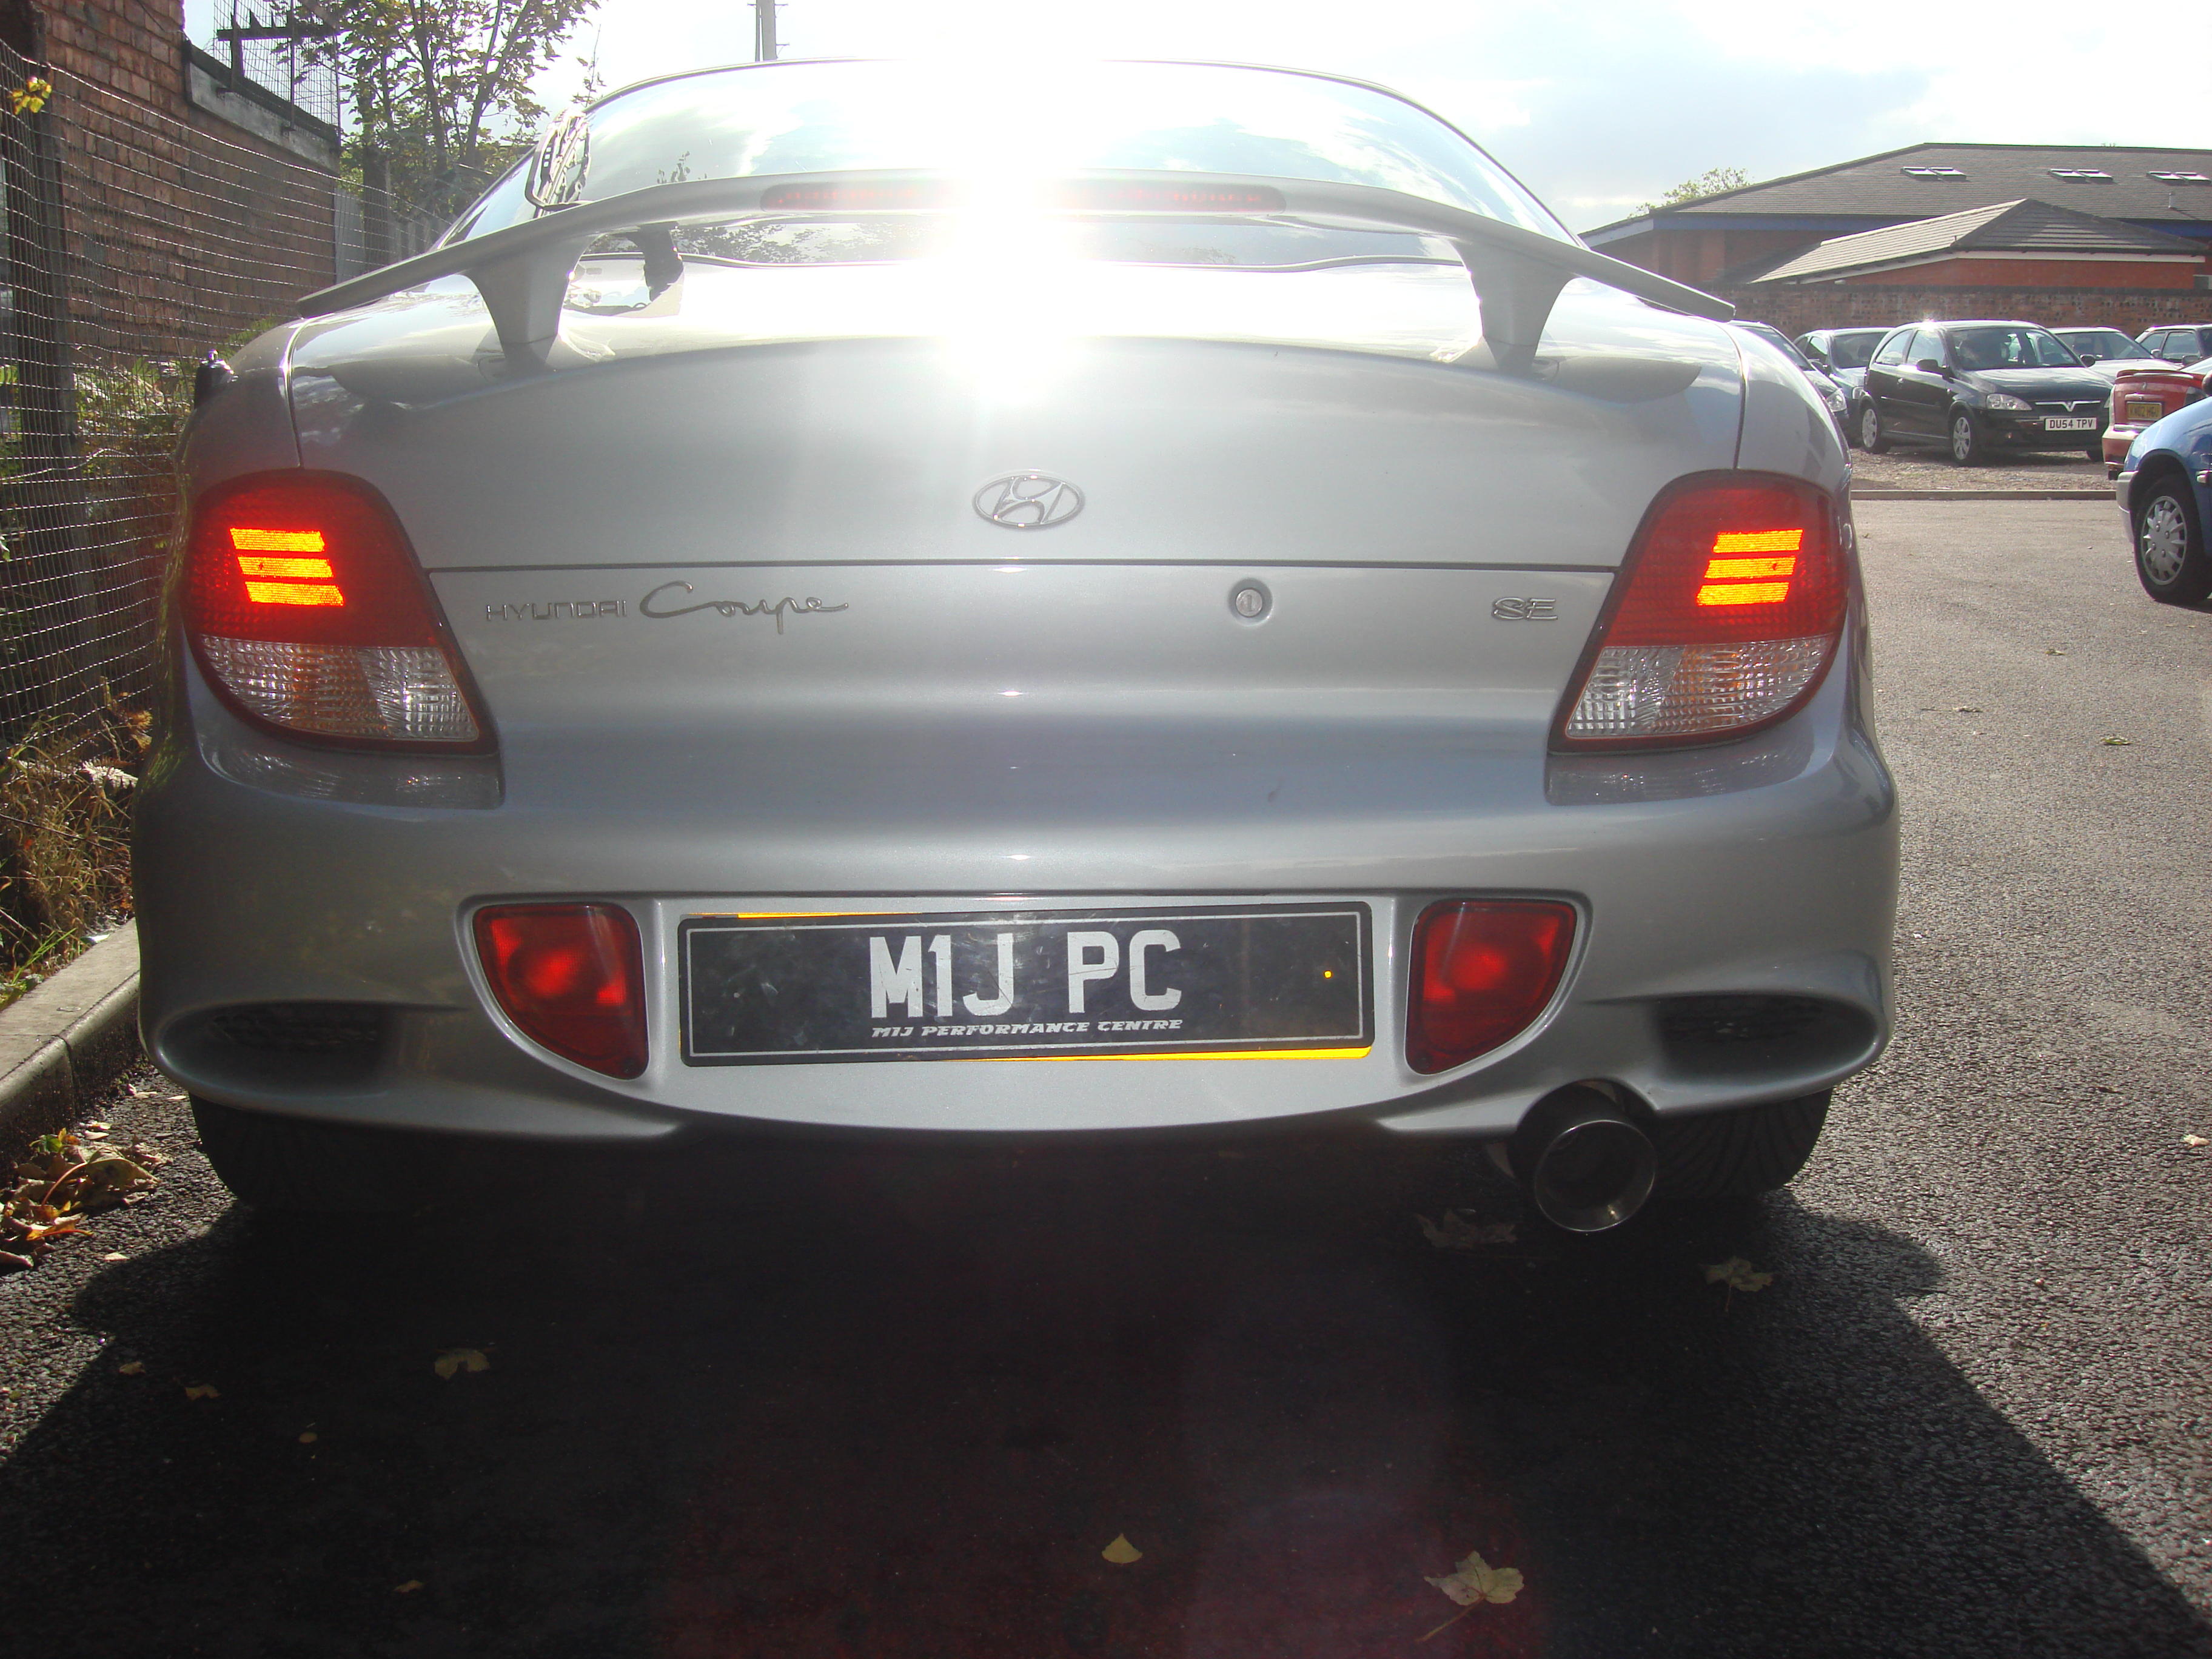 Hyundai coupe performance exhaust system